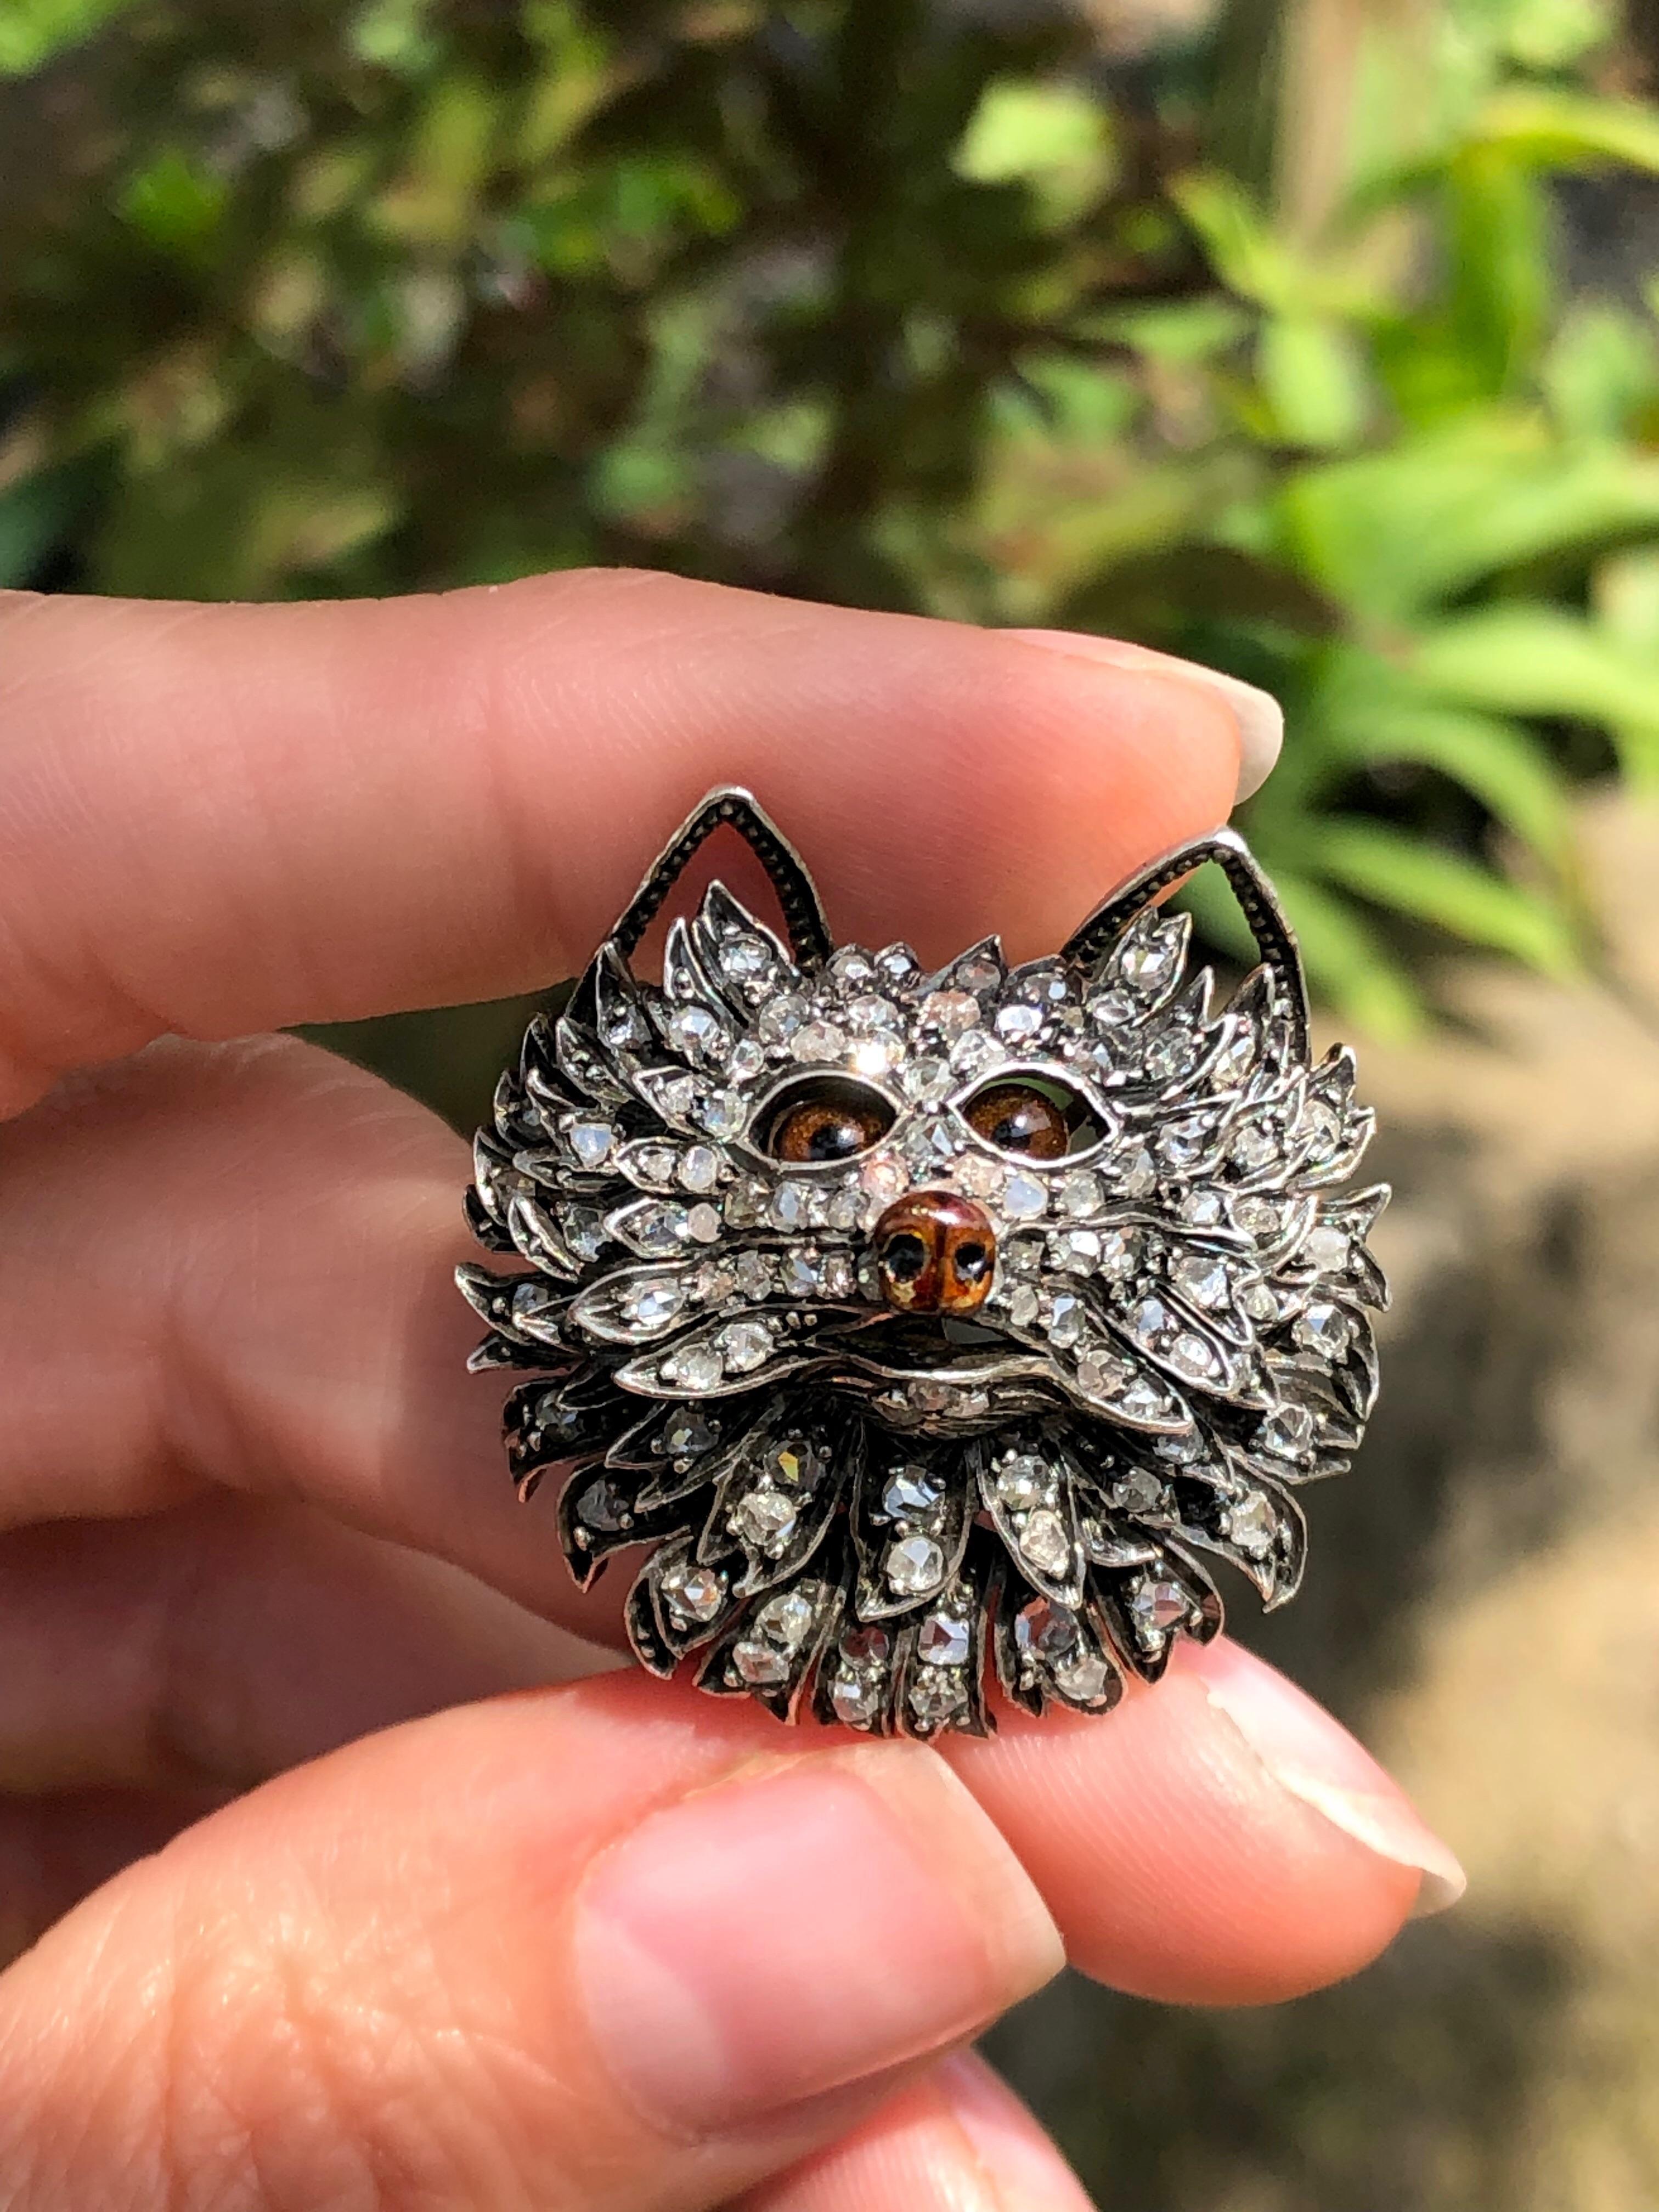 This adorably scruffy pup dates to late 19th century, France. Masterfully hand fabricated in silver topped 18k rose gold, tiny brown glass eyes almost to come to life next to the shimmer from the rose-cut diamonds. Complete with a glossy brown